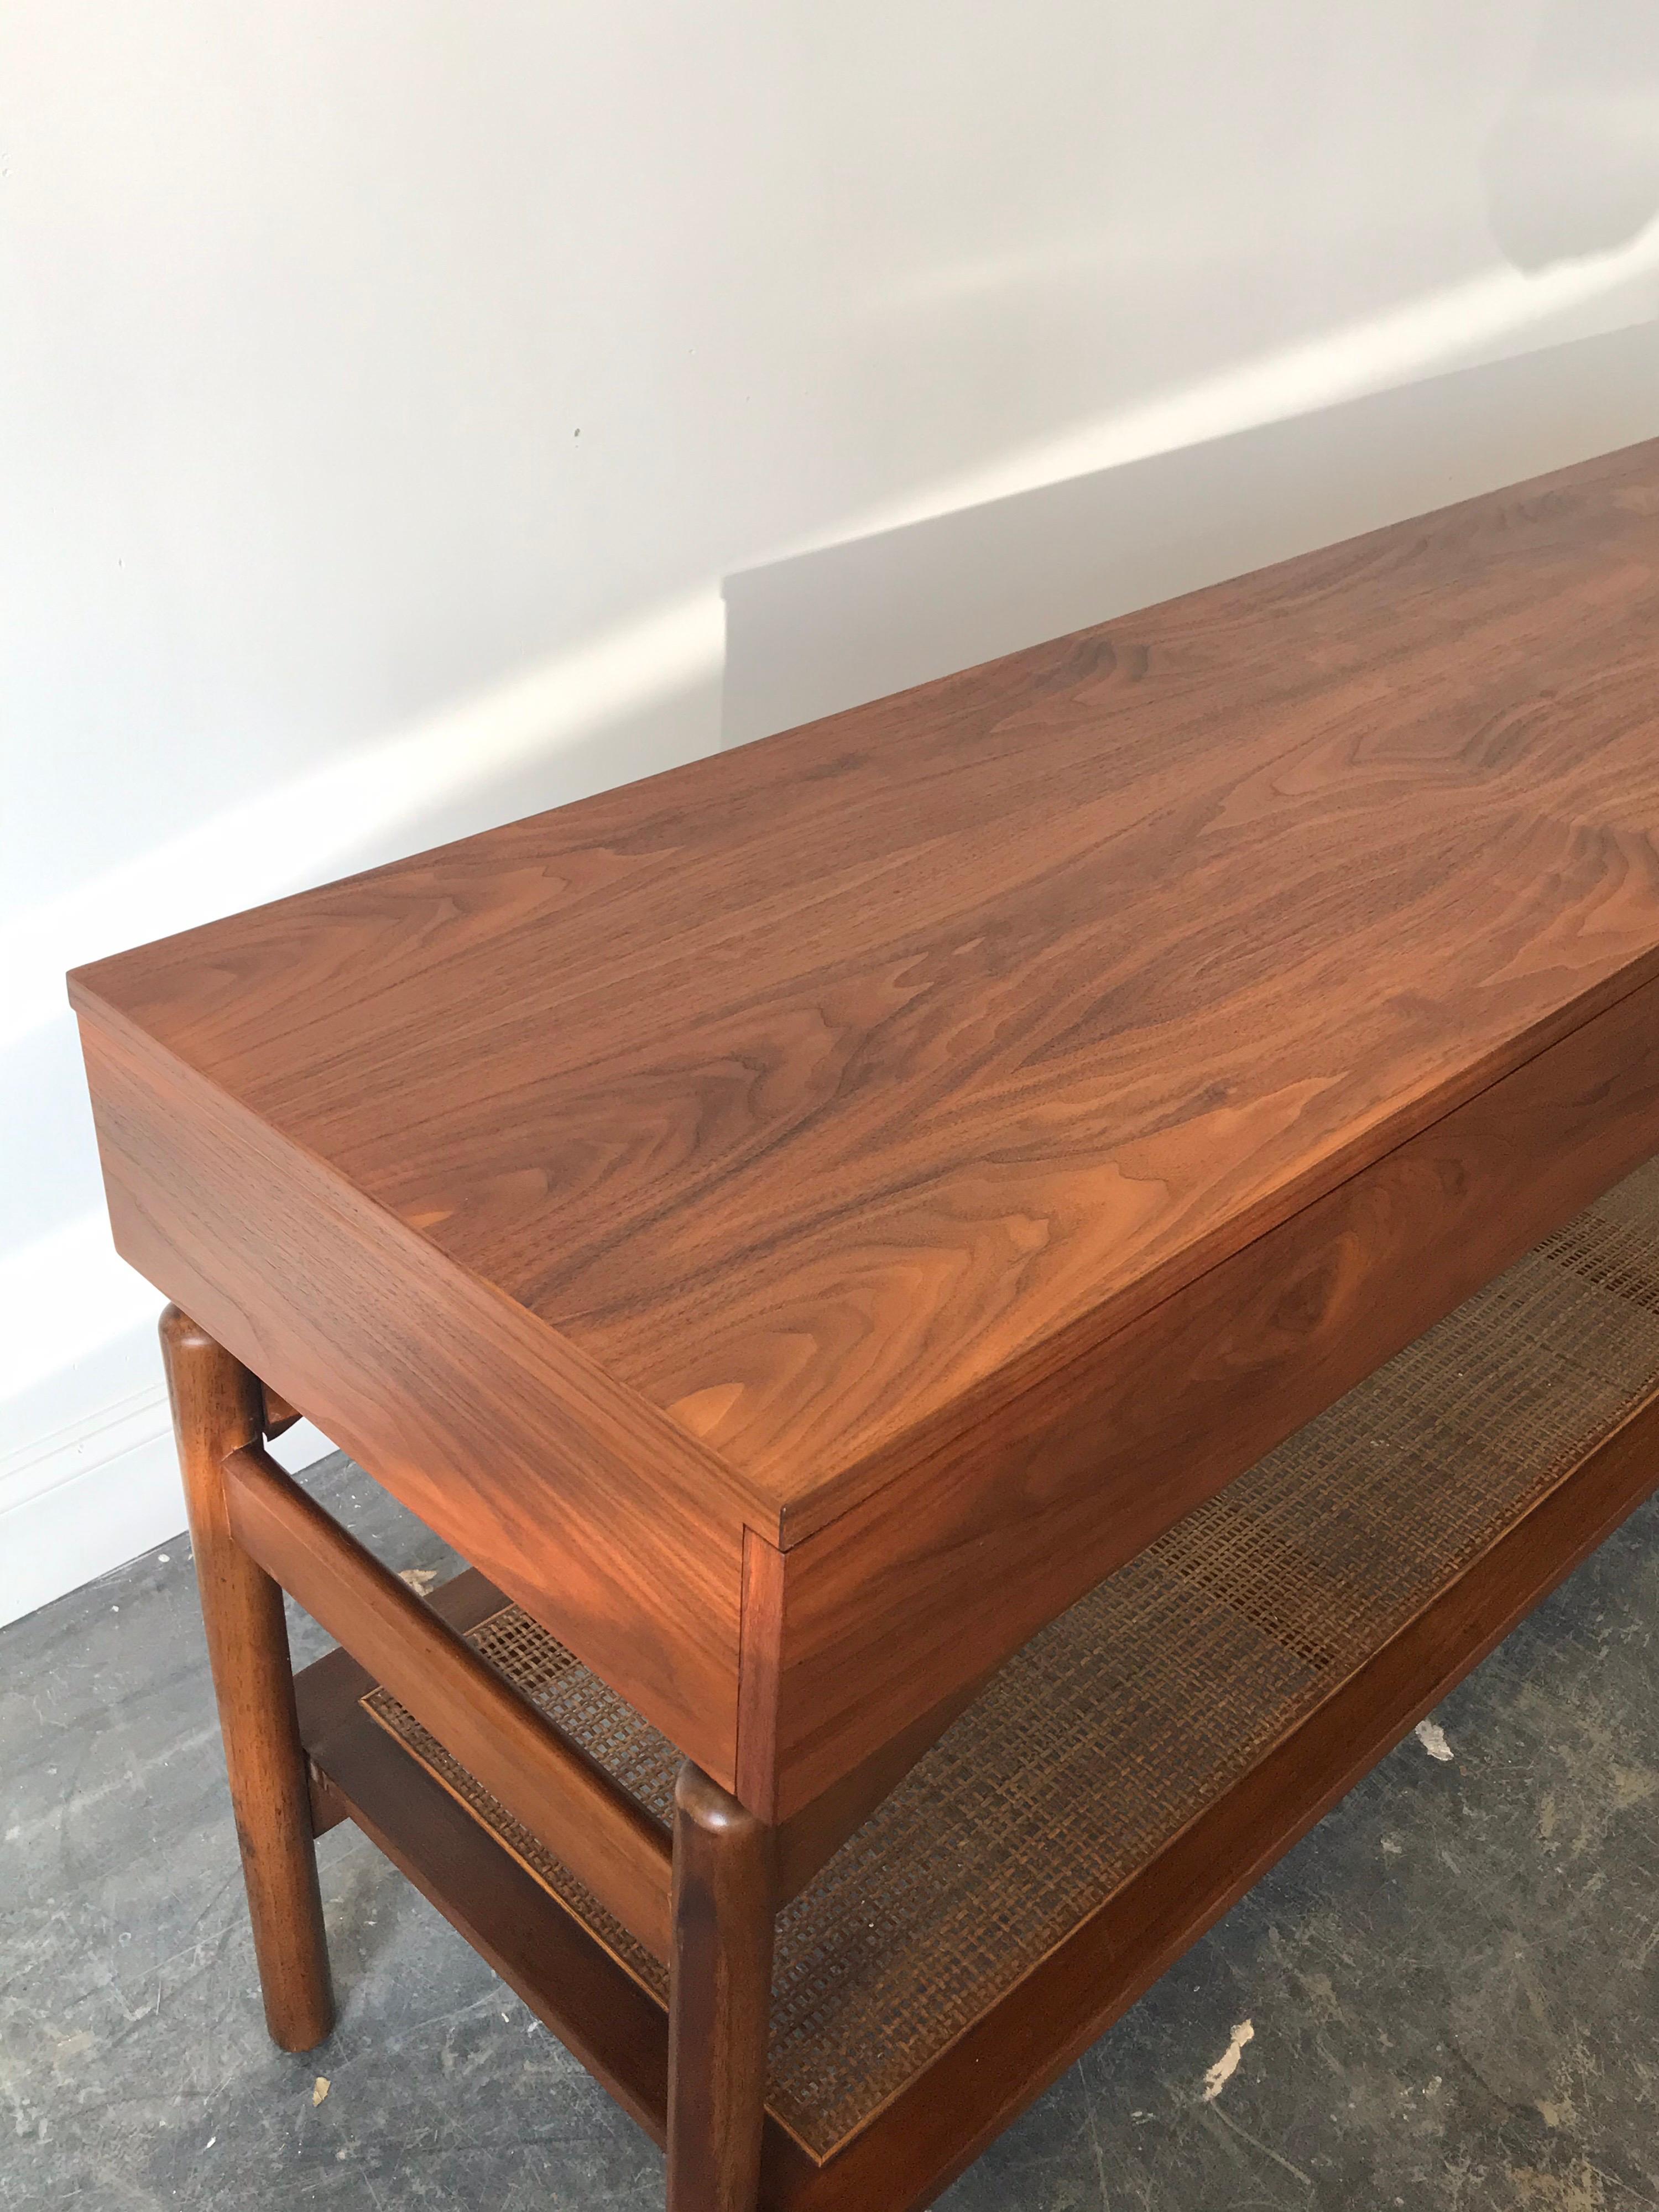 A stunning walnut console table designed by Greta Grossman for Glenn of California. Console features a three drawer case floating above a cane shelf. Drawer on the right is felt lined. Top, sides, and drawer fronts all refinished. Legs have been